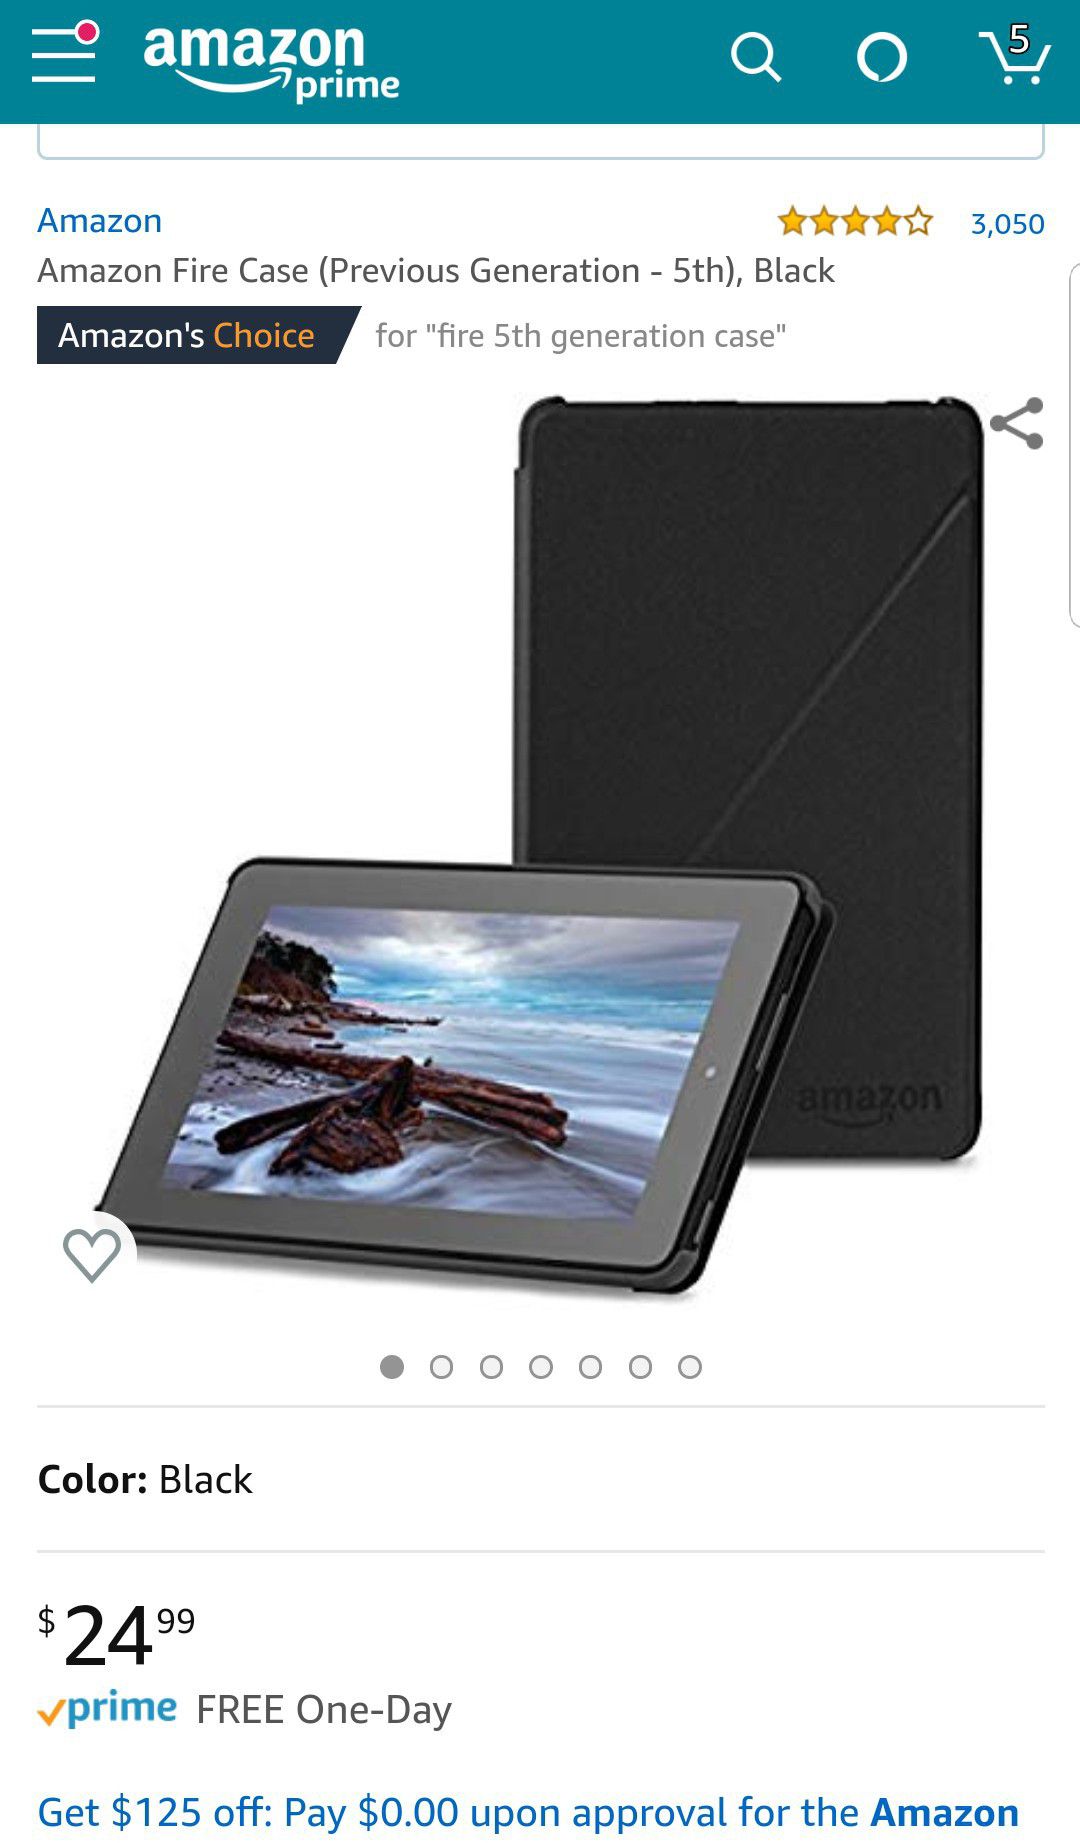 Amazon fire case for 5th generation tablet